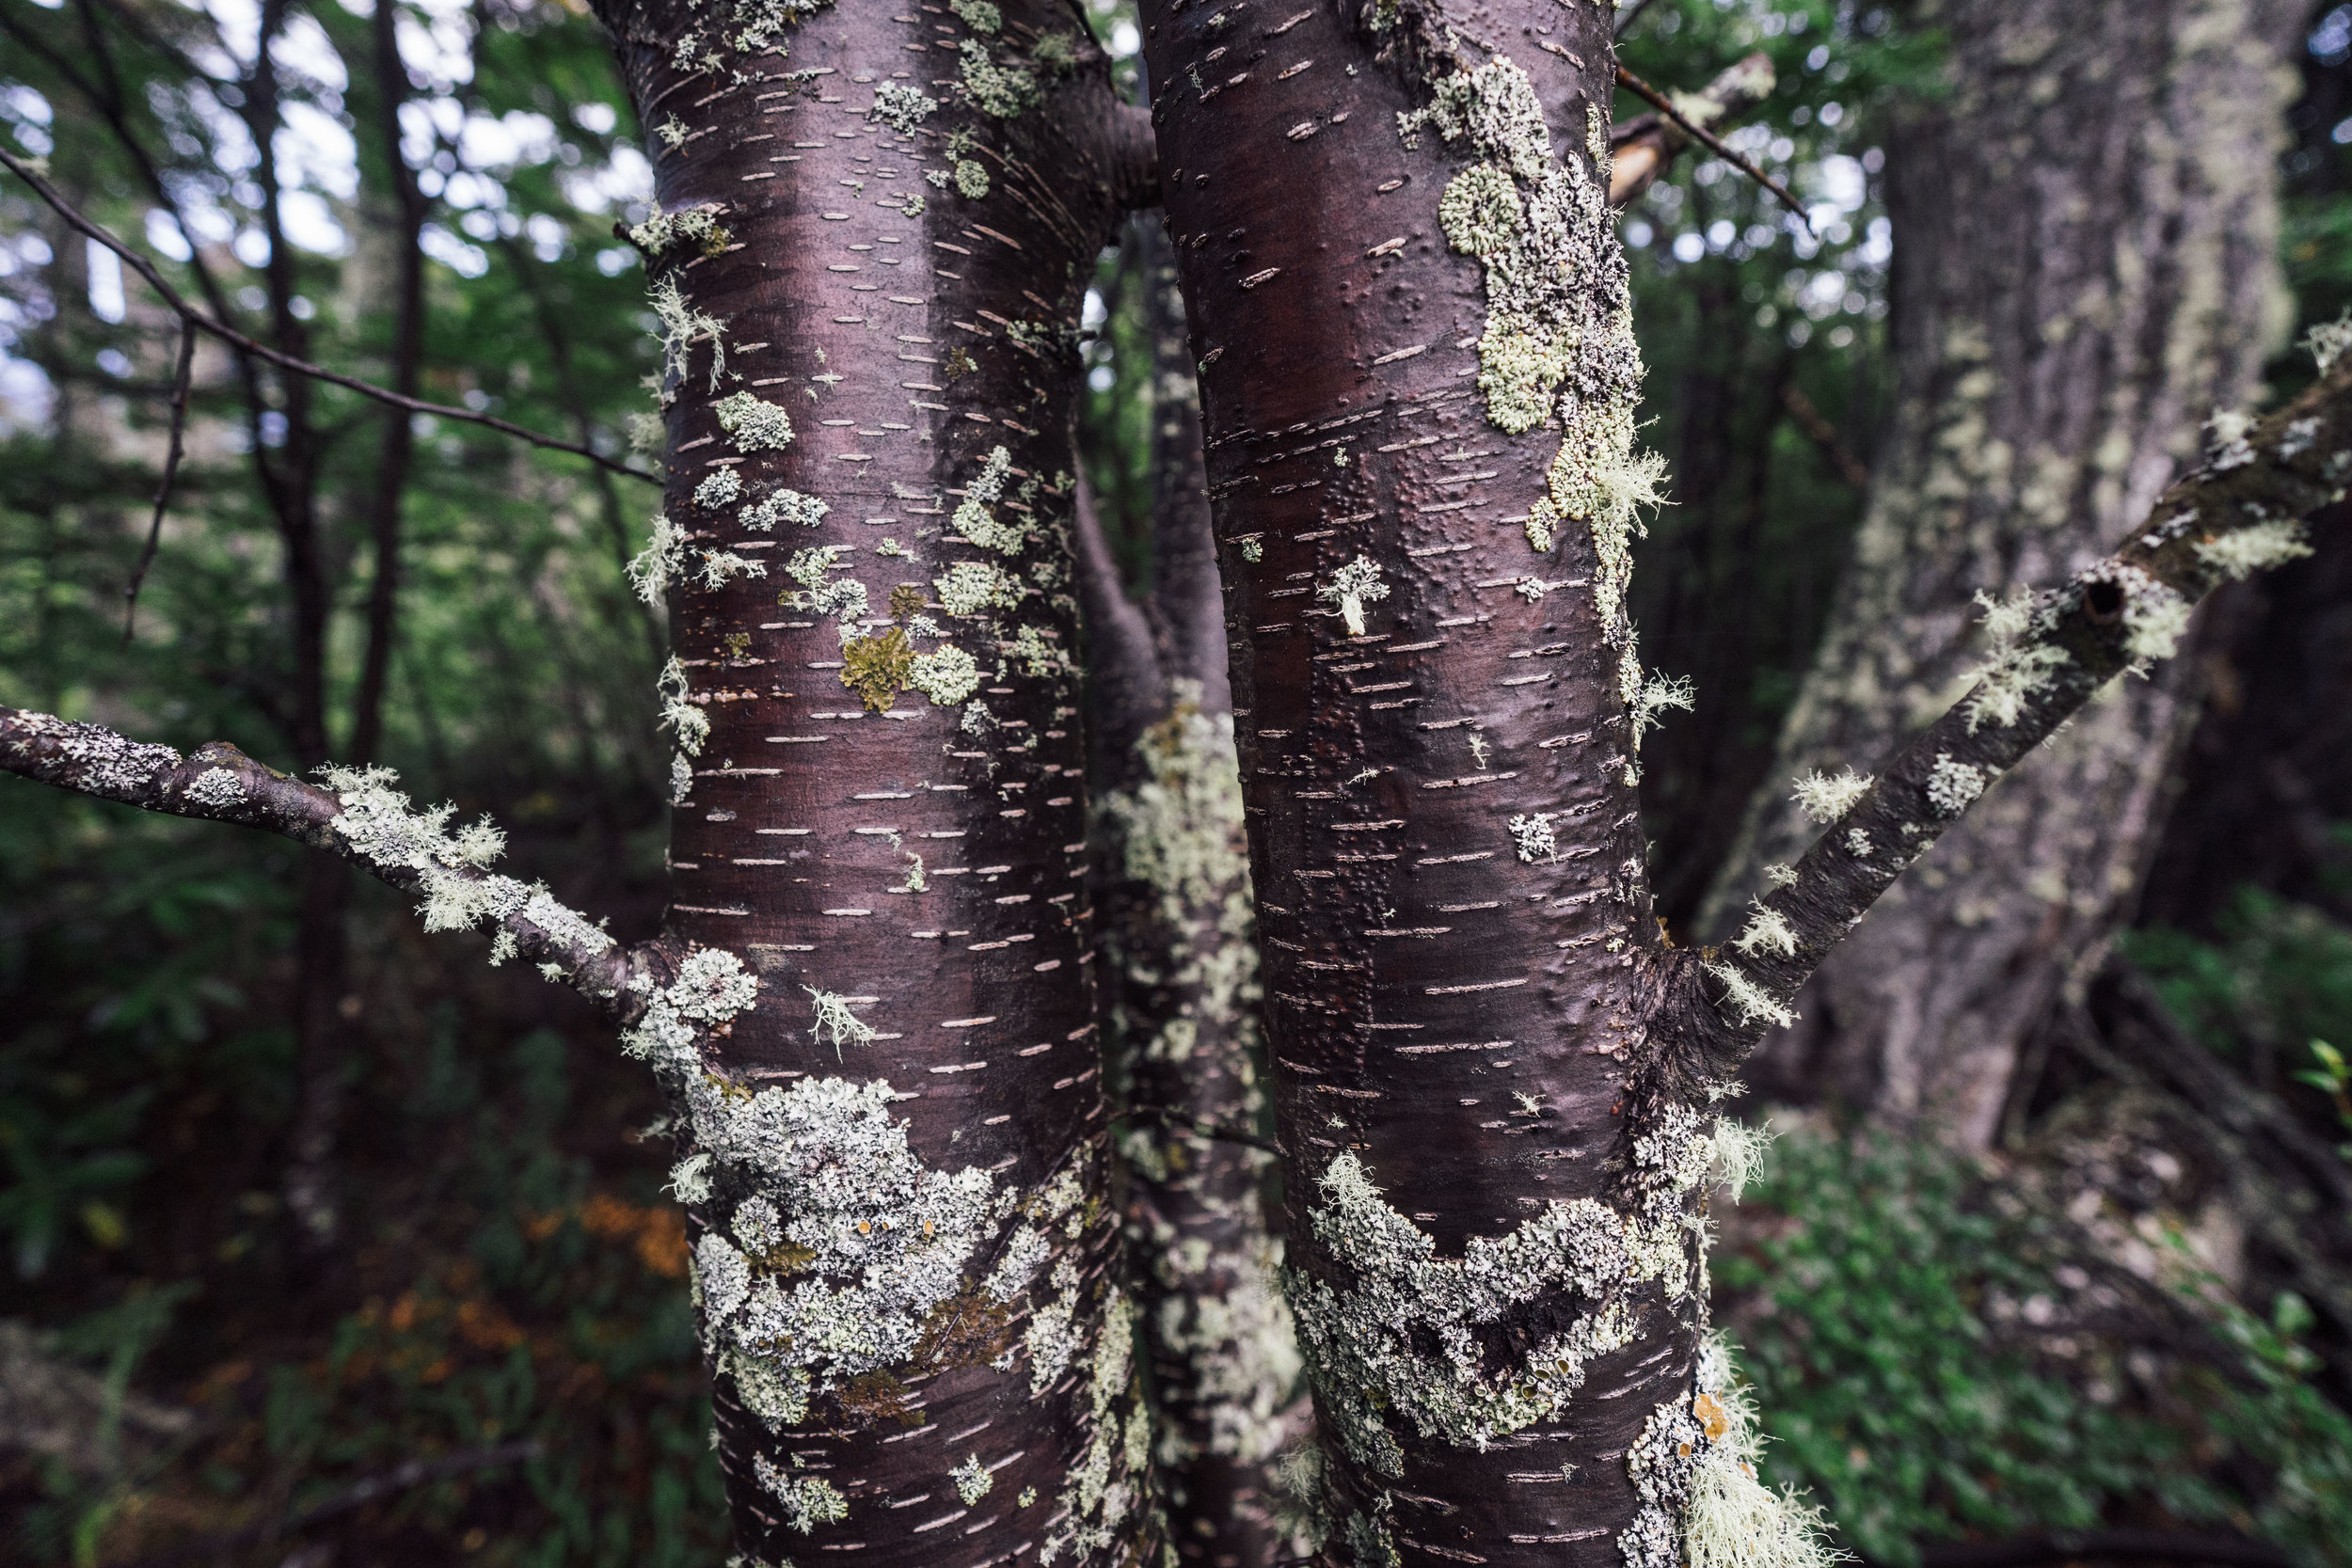 "Lenga" trees hosting a variety of lichens on their bark 